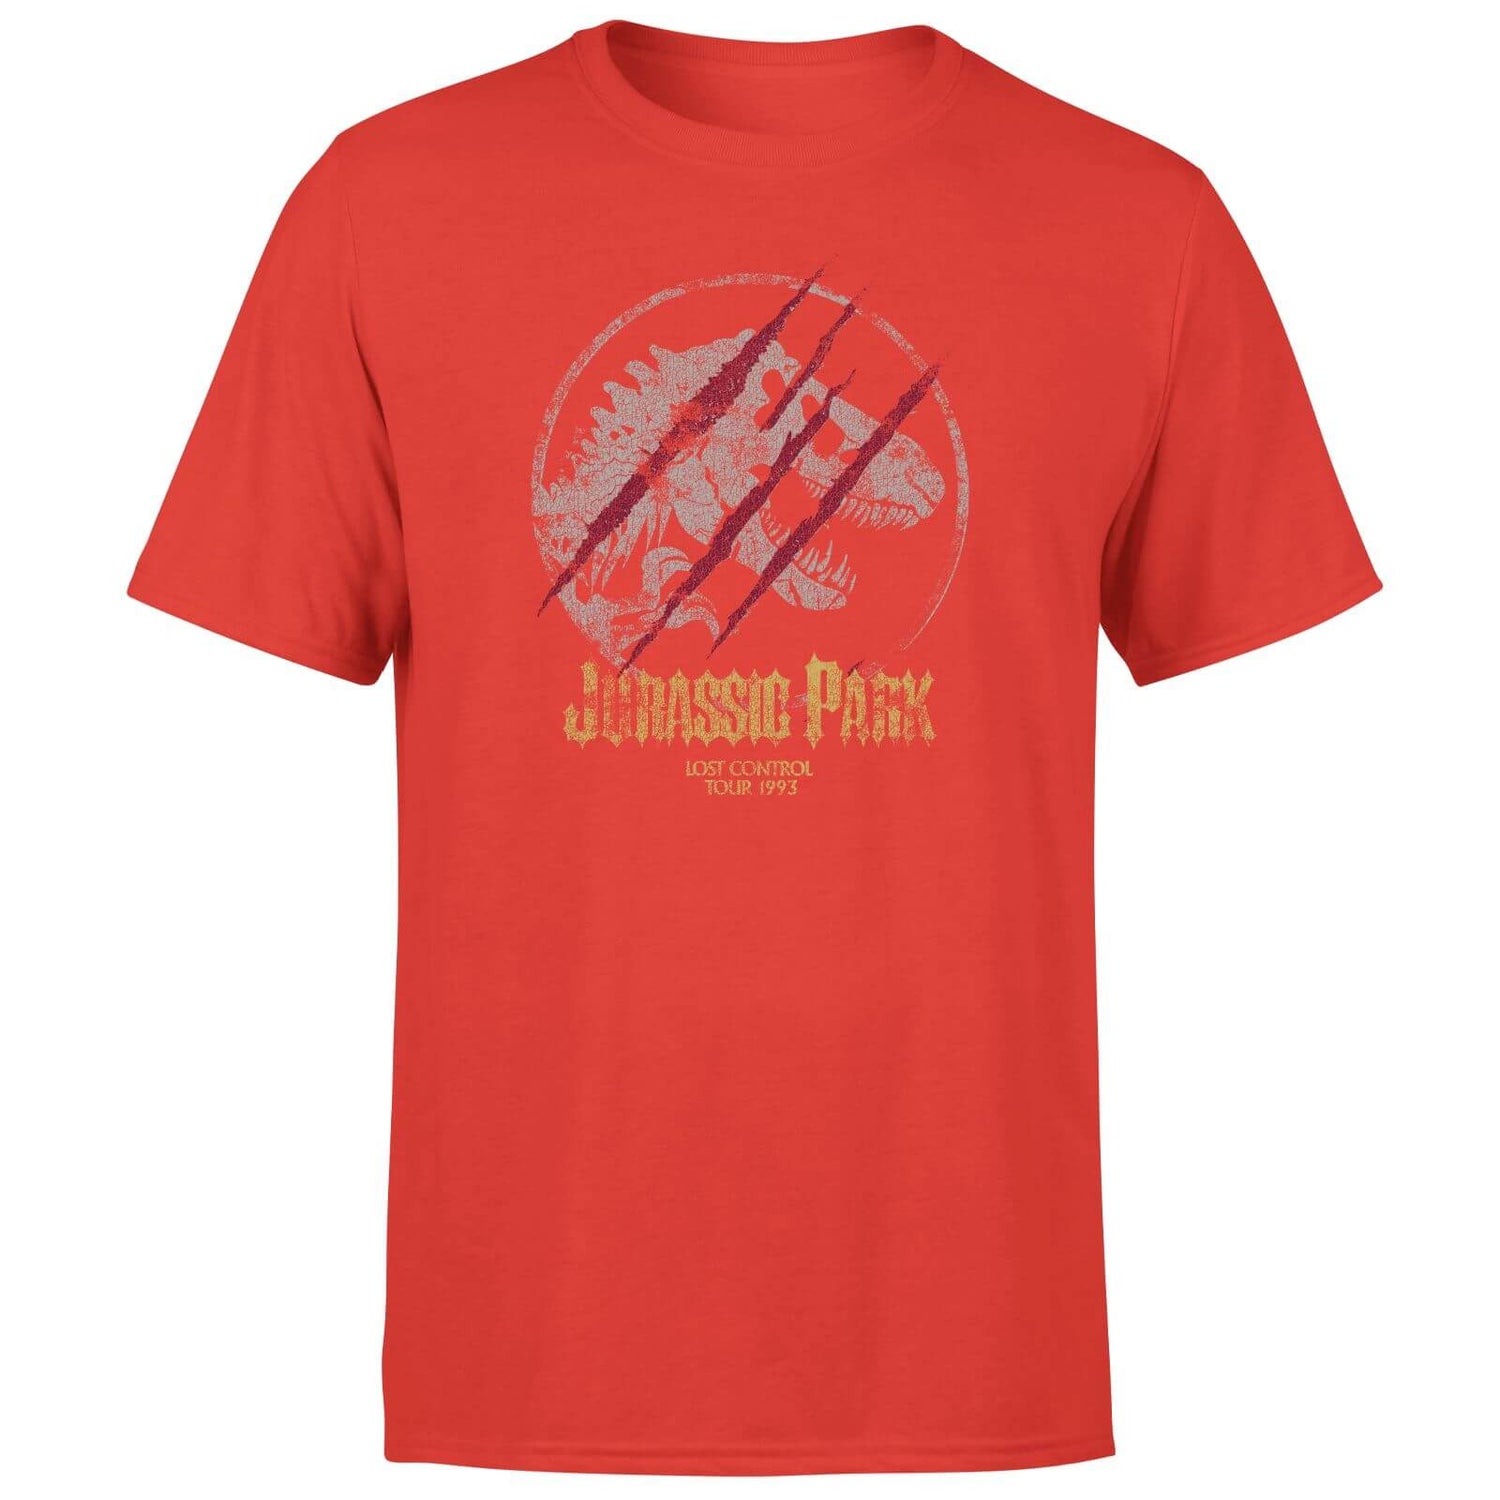 Jurassic Park Lost Control Men's T-Shirt - Red